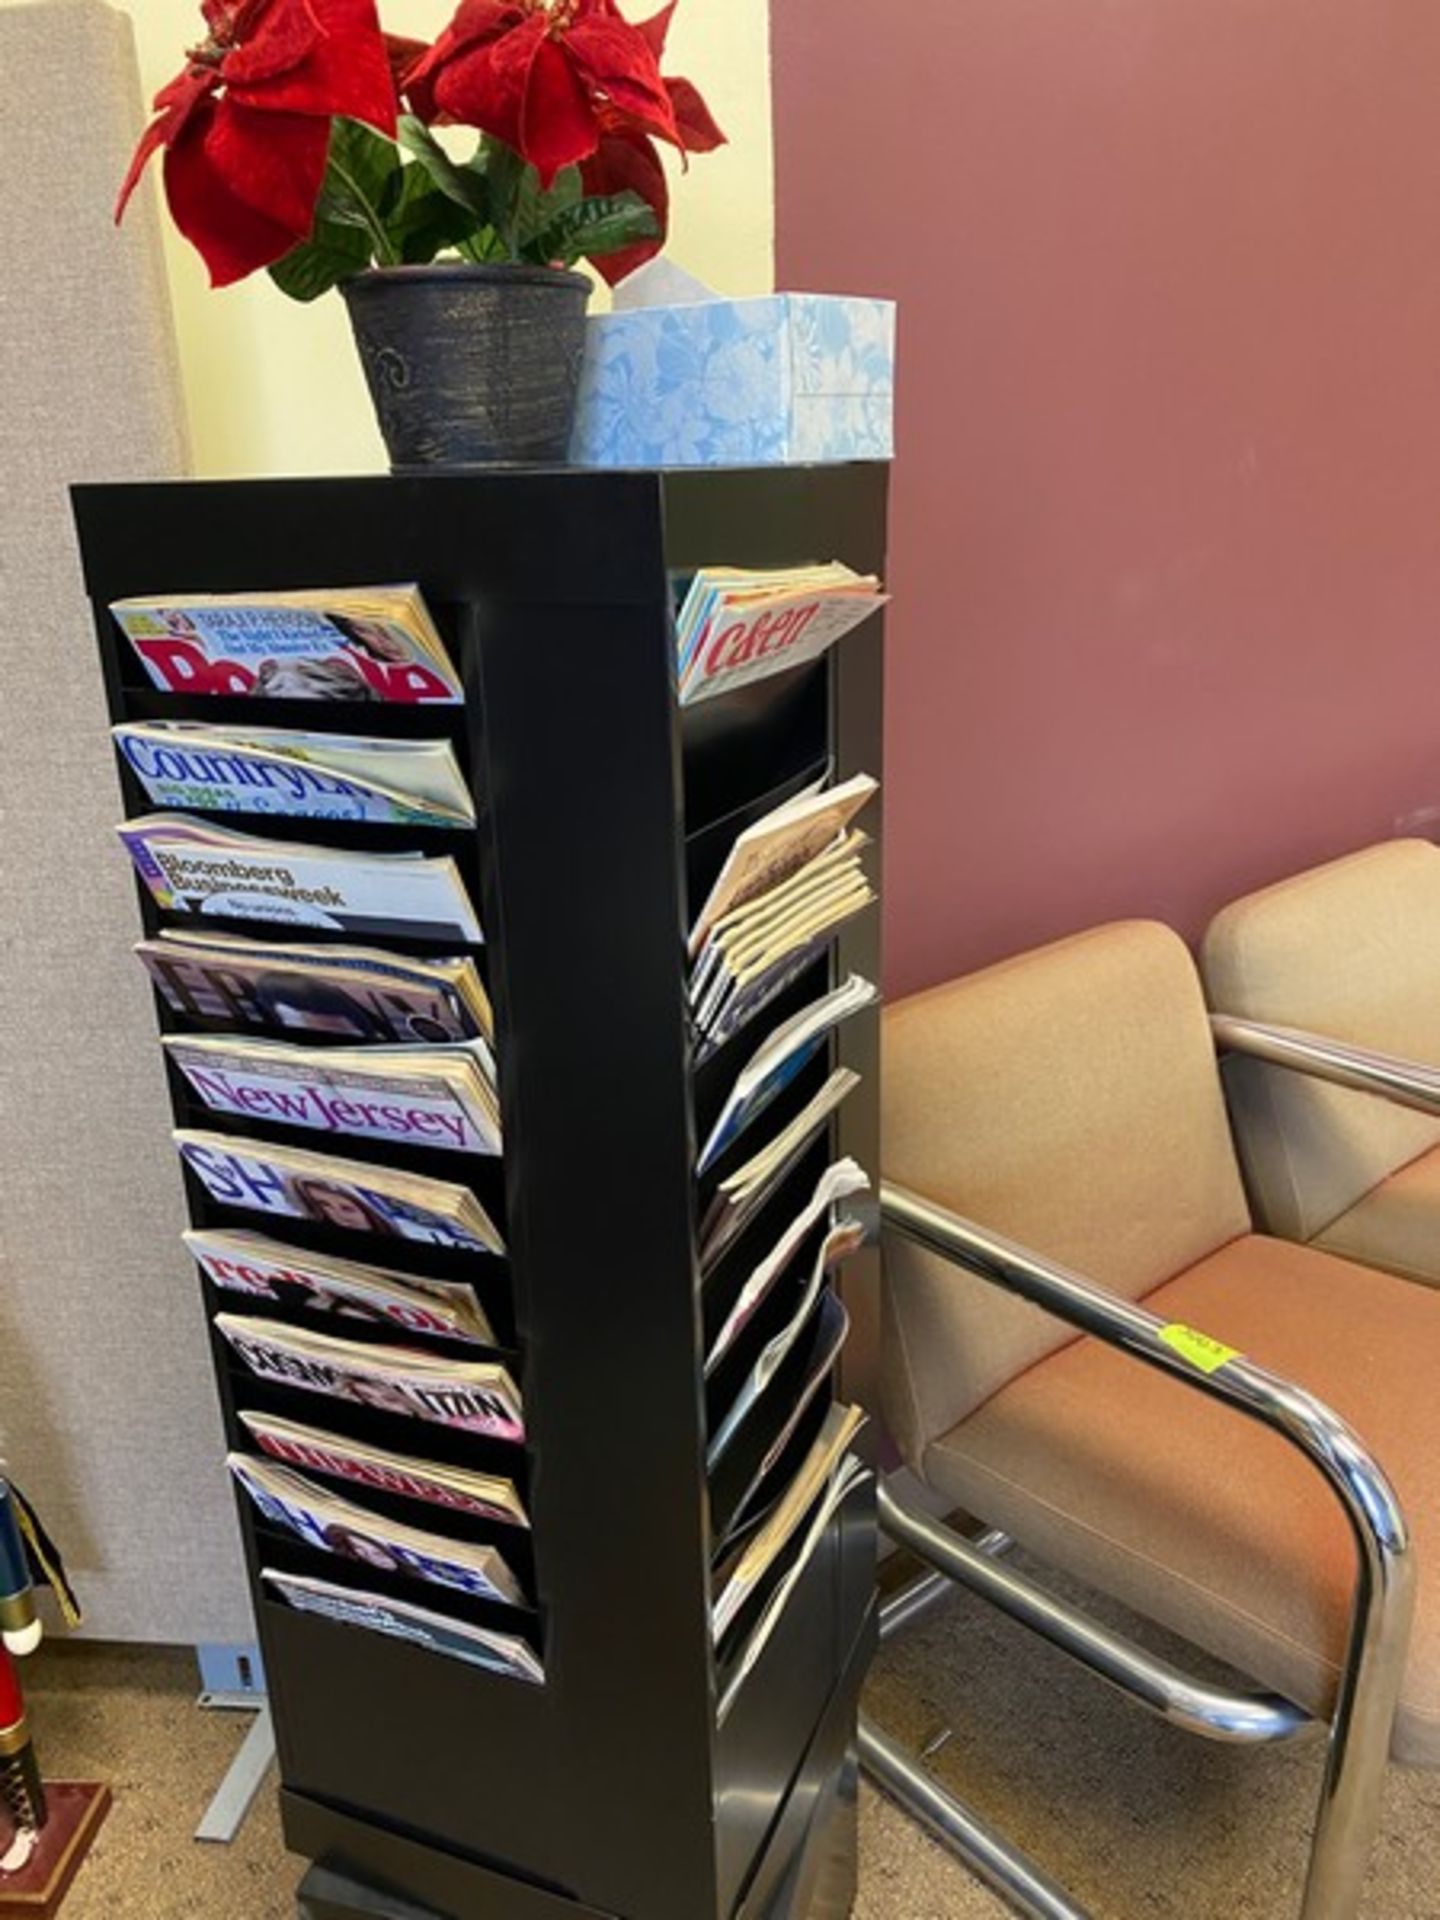 8 unit lot w/ 7 assorted style office chairs + 1 black metal magazine rack. Chairs are mixed styles, - Image 2 of 6